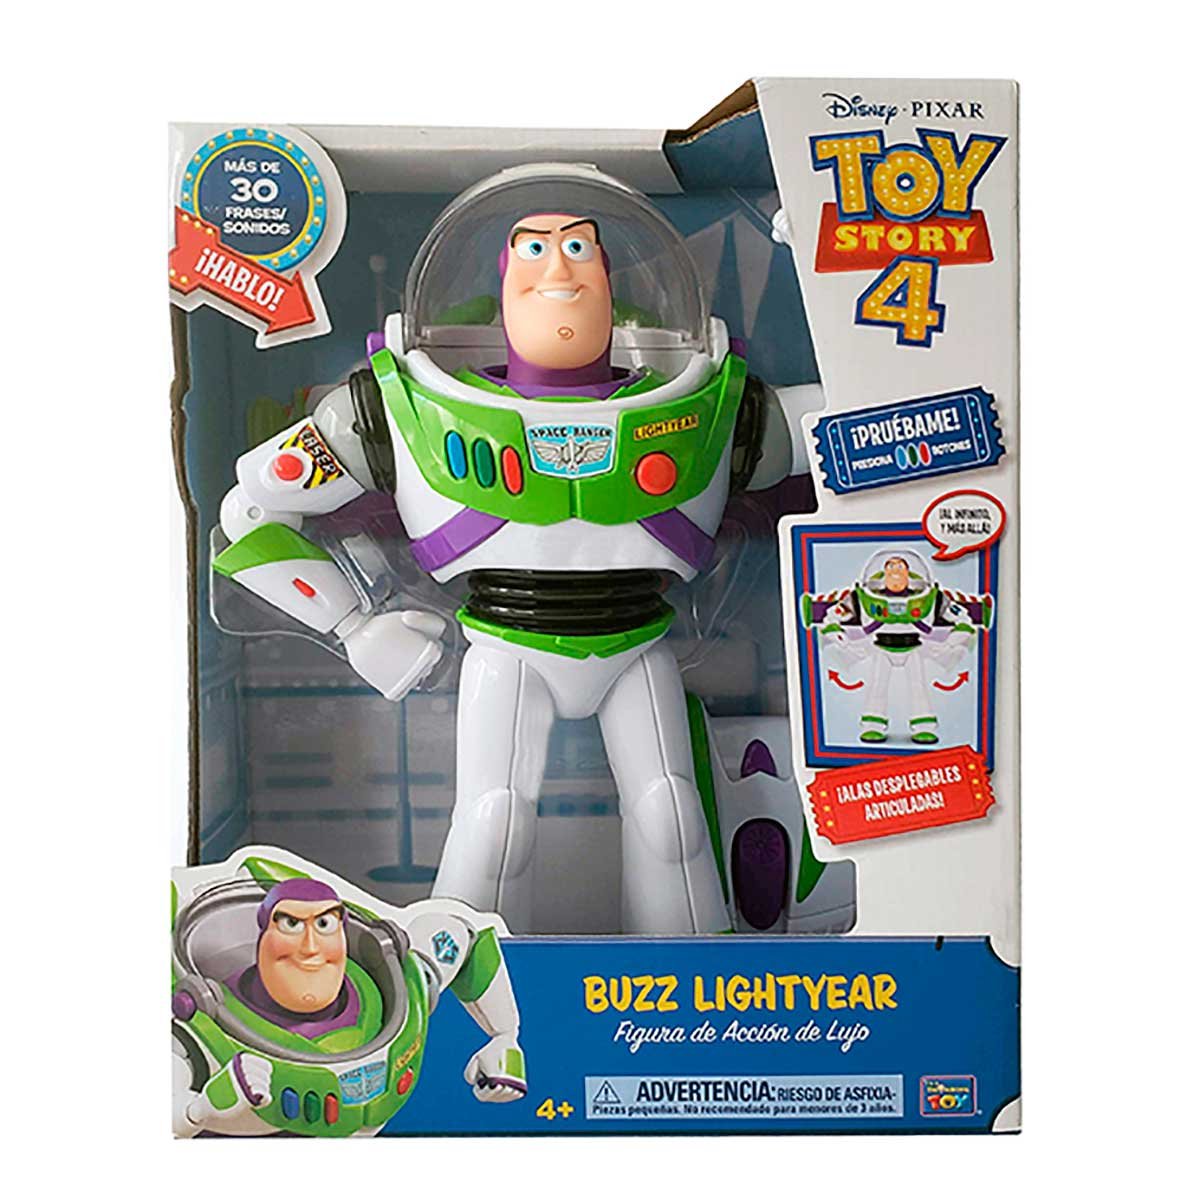 Toy Story 4 Buzz Lightyear Deluxe Toy Plus